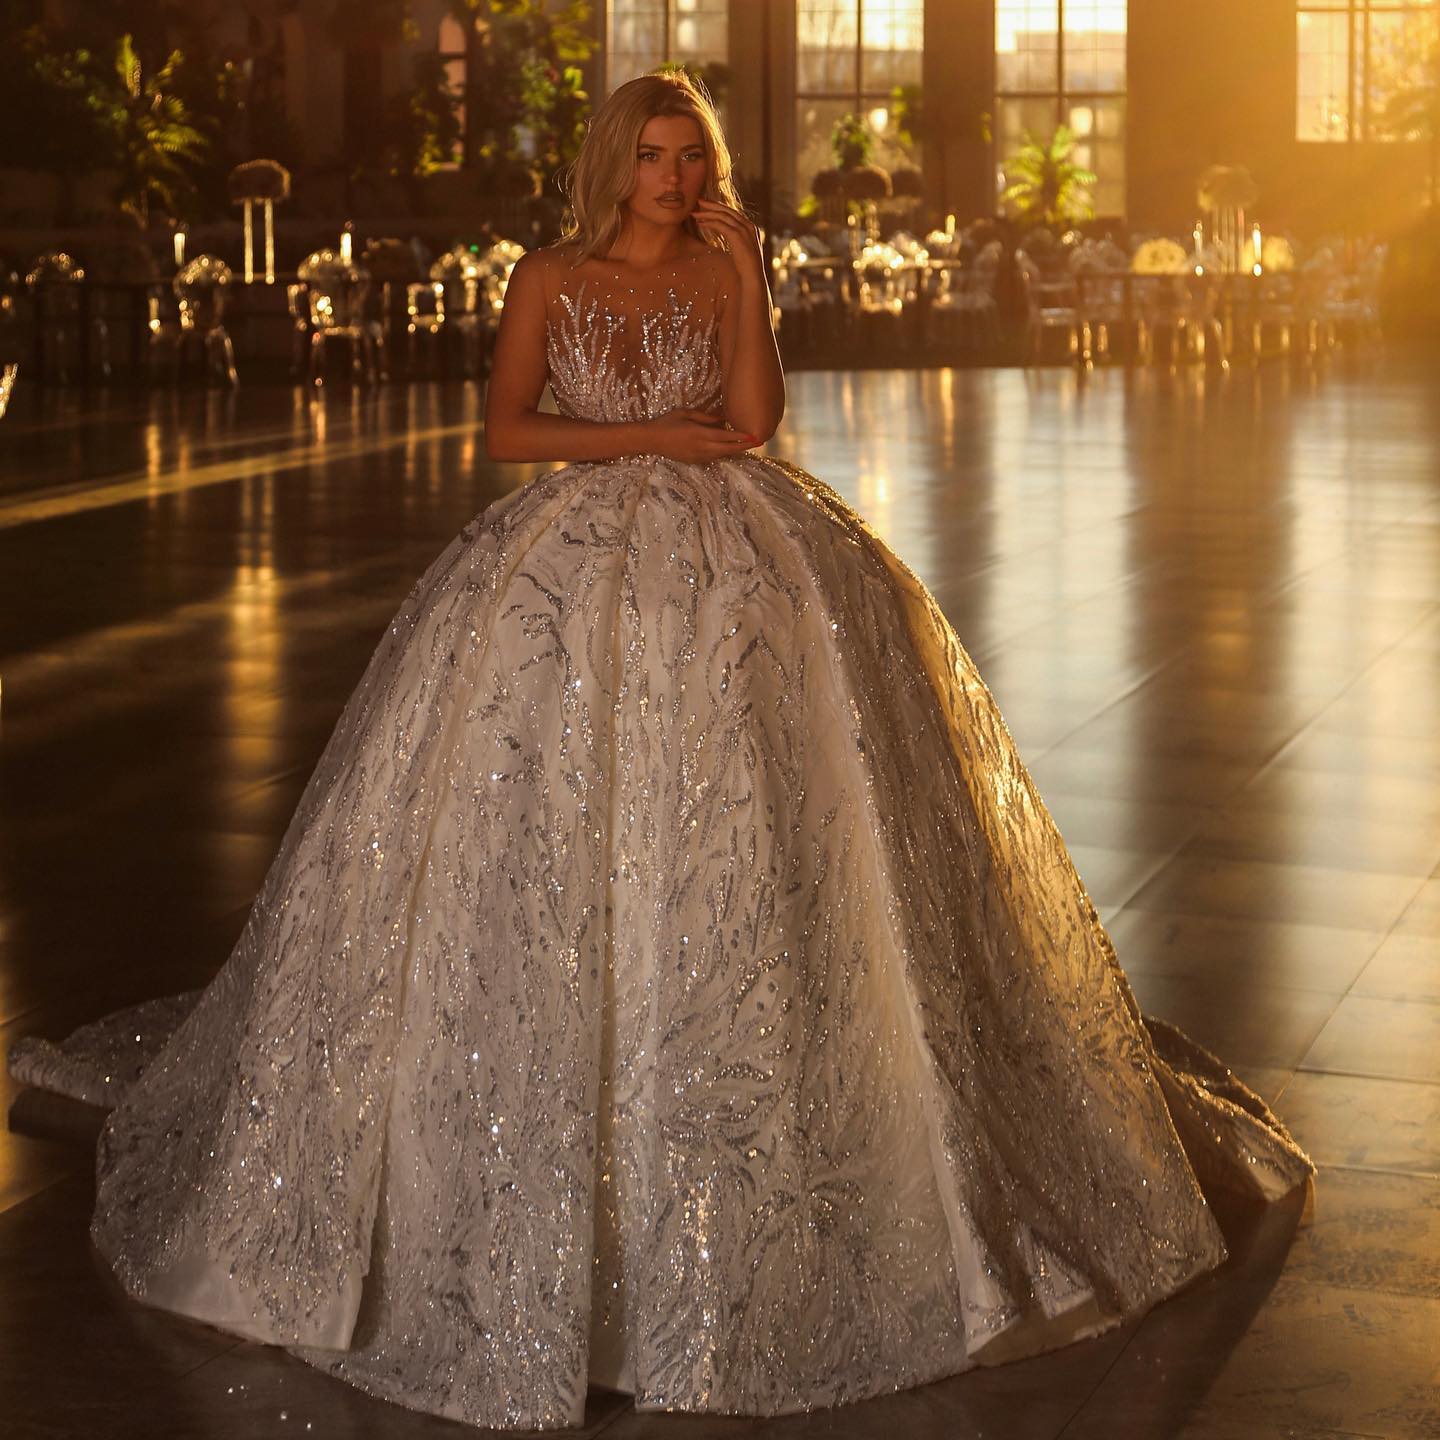 Charming Ball Gown Wedding Dresses Shining Appliques Sequins Beads Bridal Sweep Train Backless Lace Up Court Gown Custom Made Plus Size Vestidos De Novia